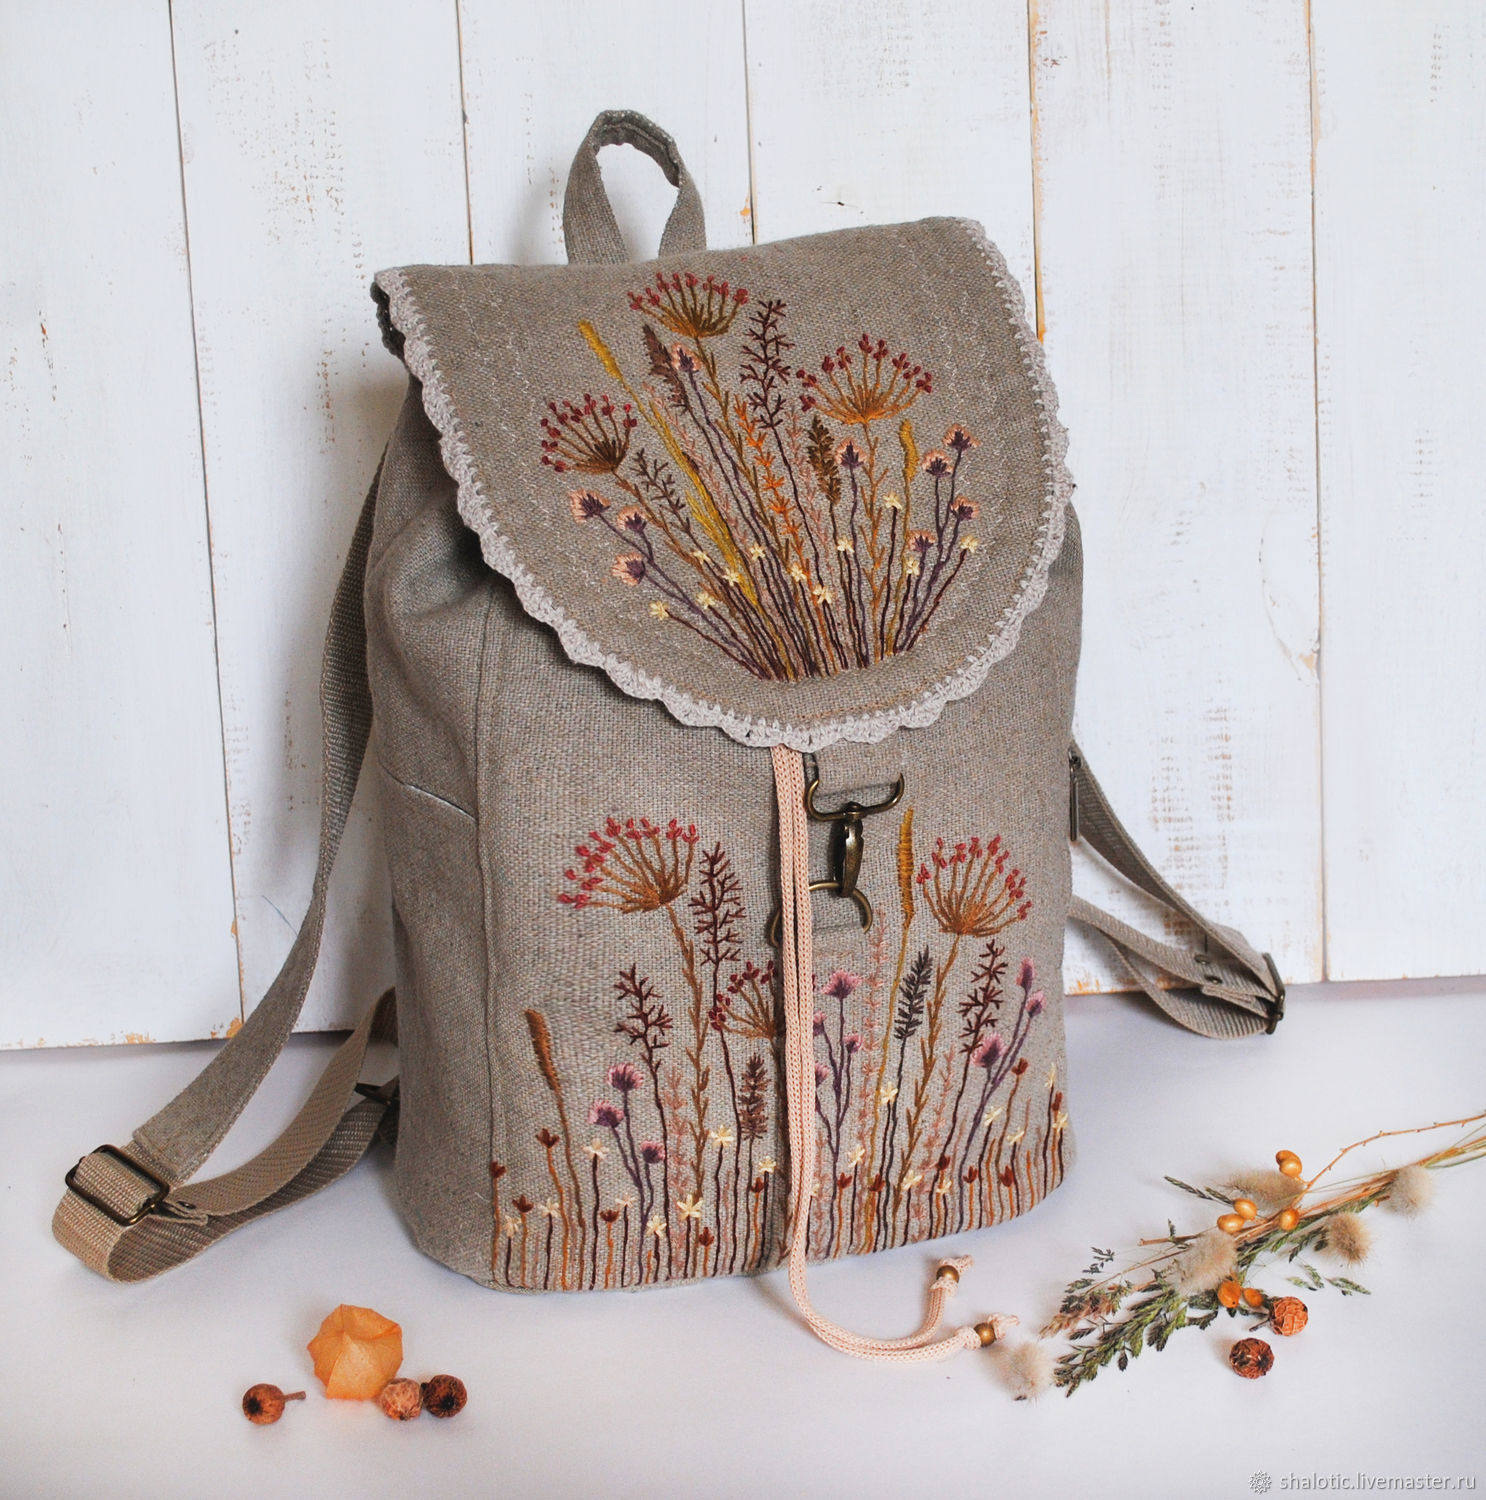 Backpack eco-style linen. Backpack with handmade embroidery. Stylish backpack as a gift. Bags and backpacks handmade, author Julia Linen tale
